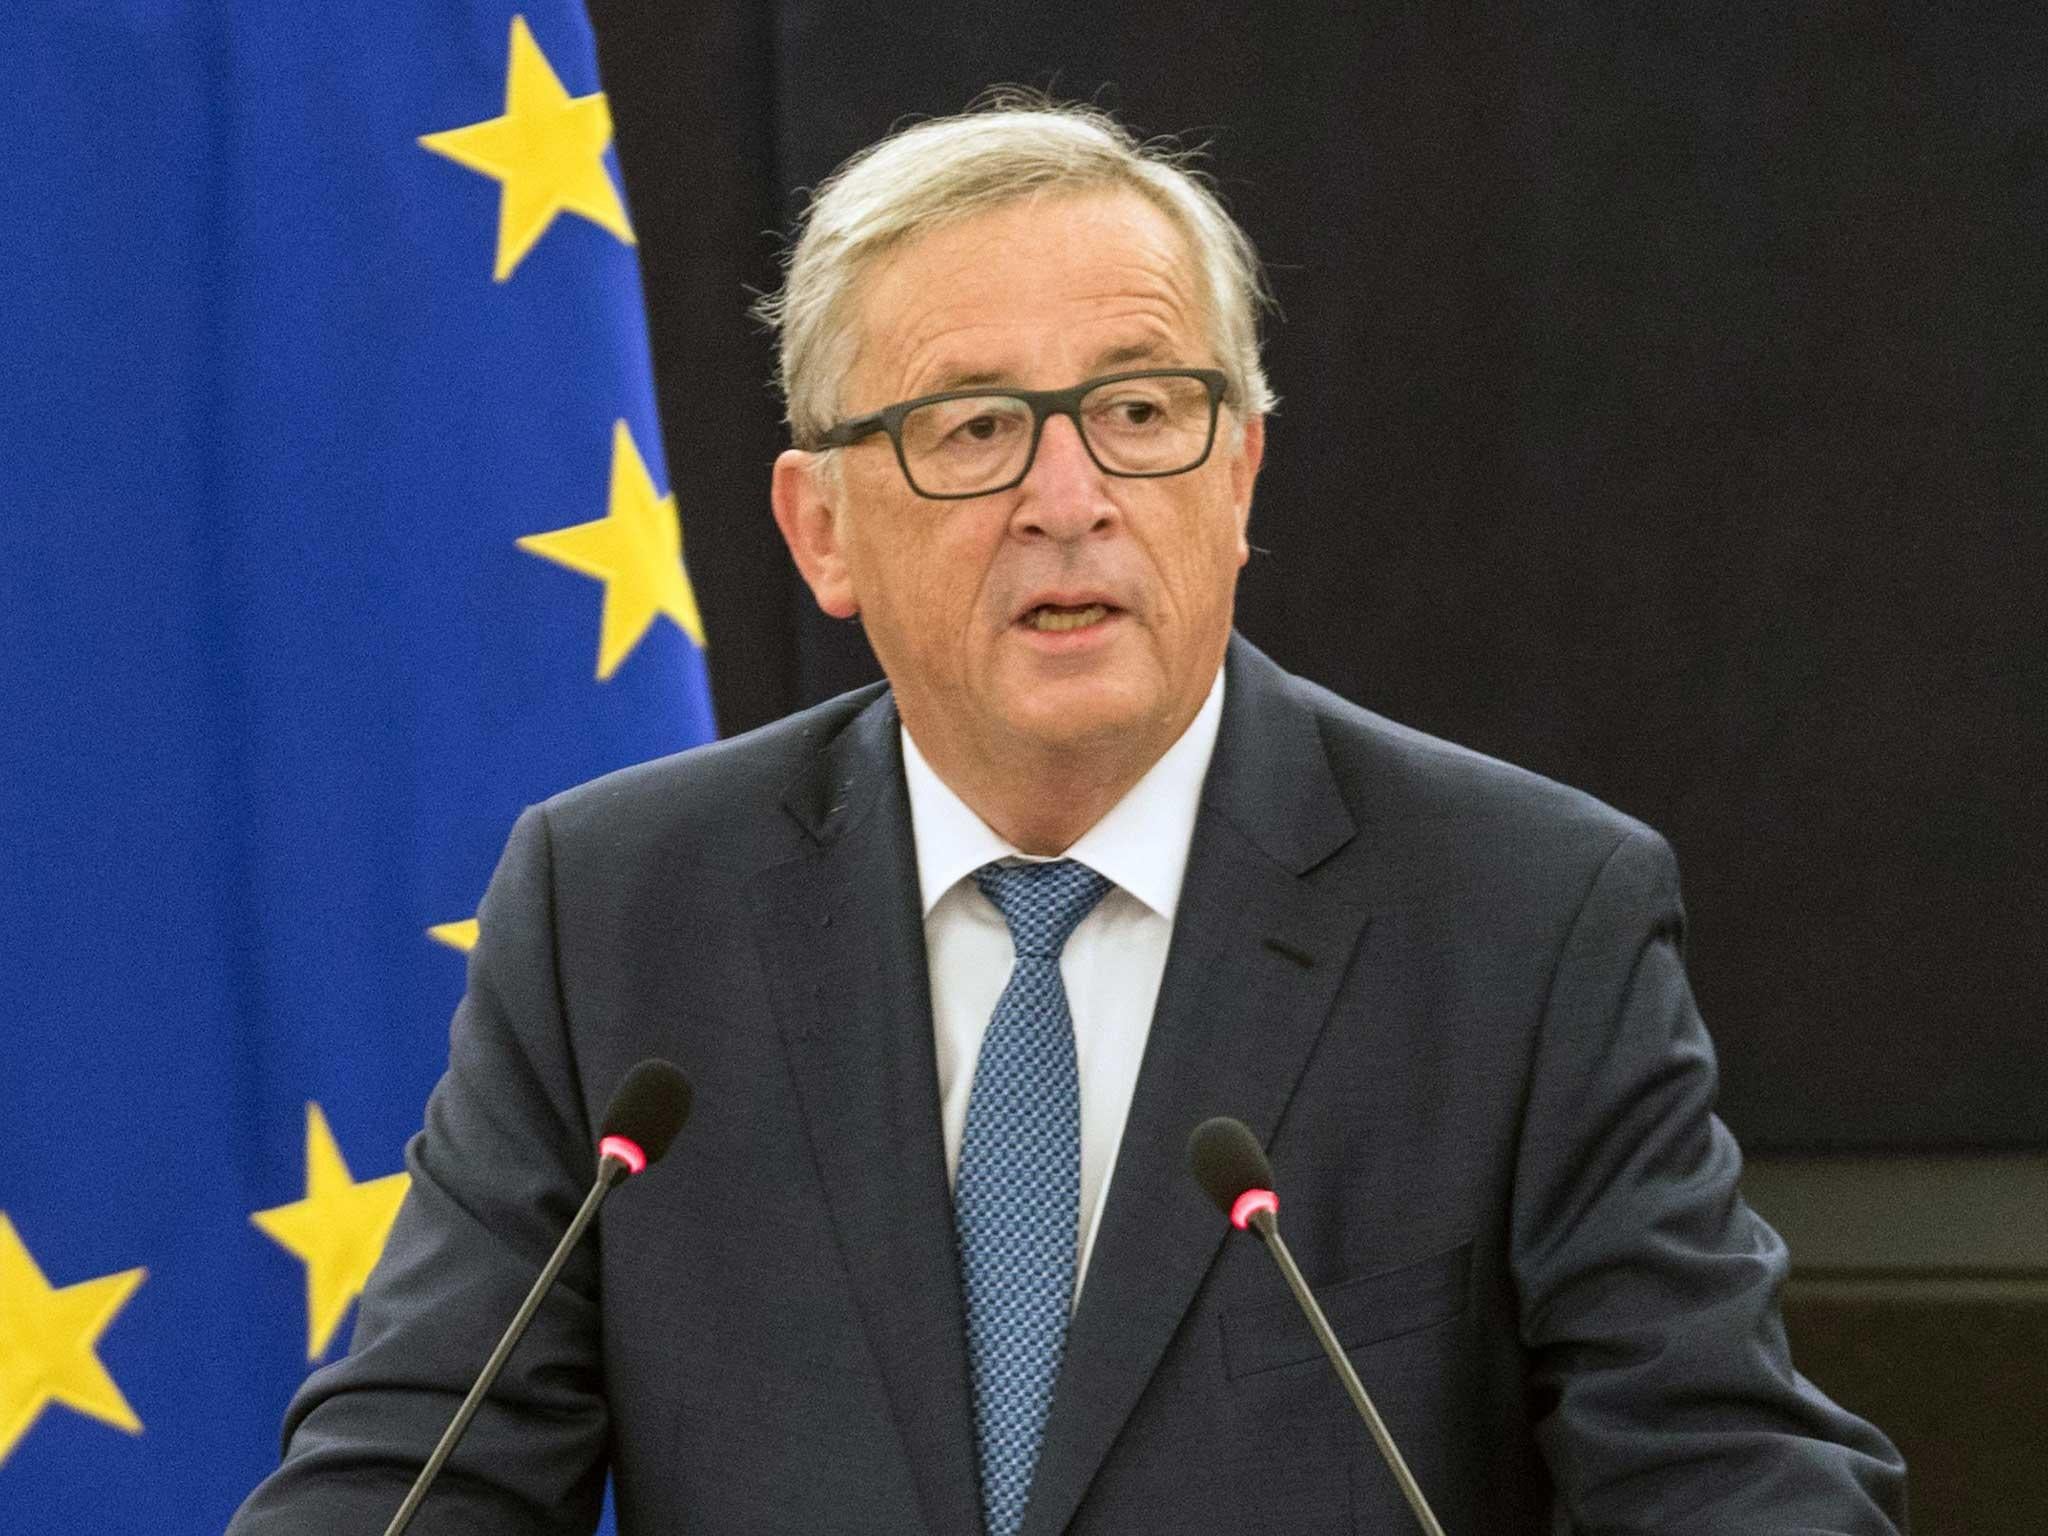 President of the European Commission Jean-Claude Juncker delivers the annual State of The European Union speech in the European Parliament in Strasbourg